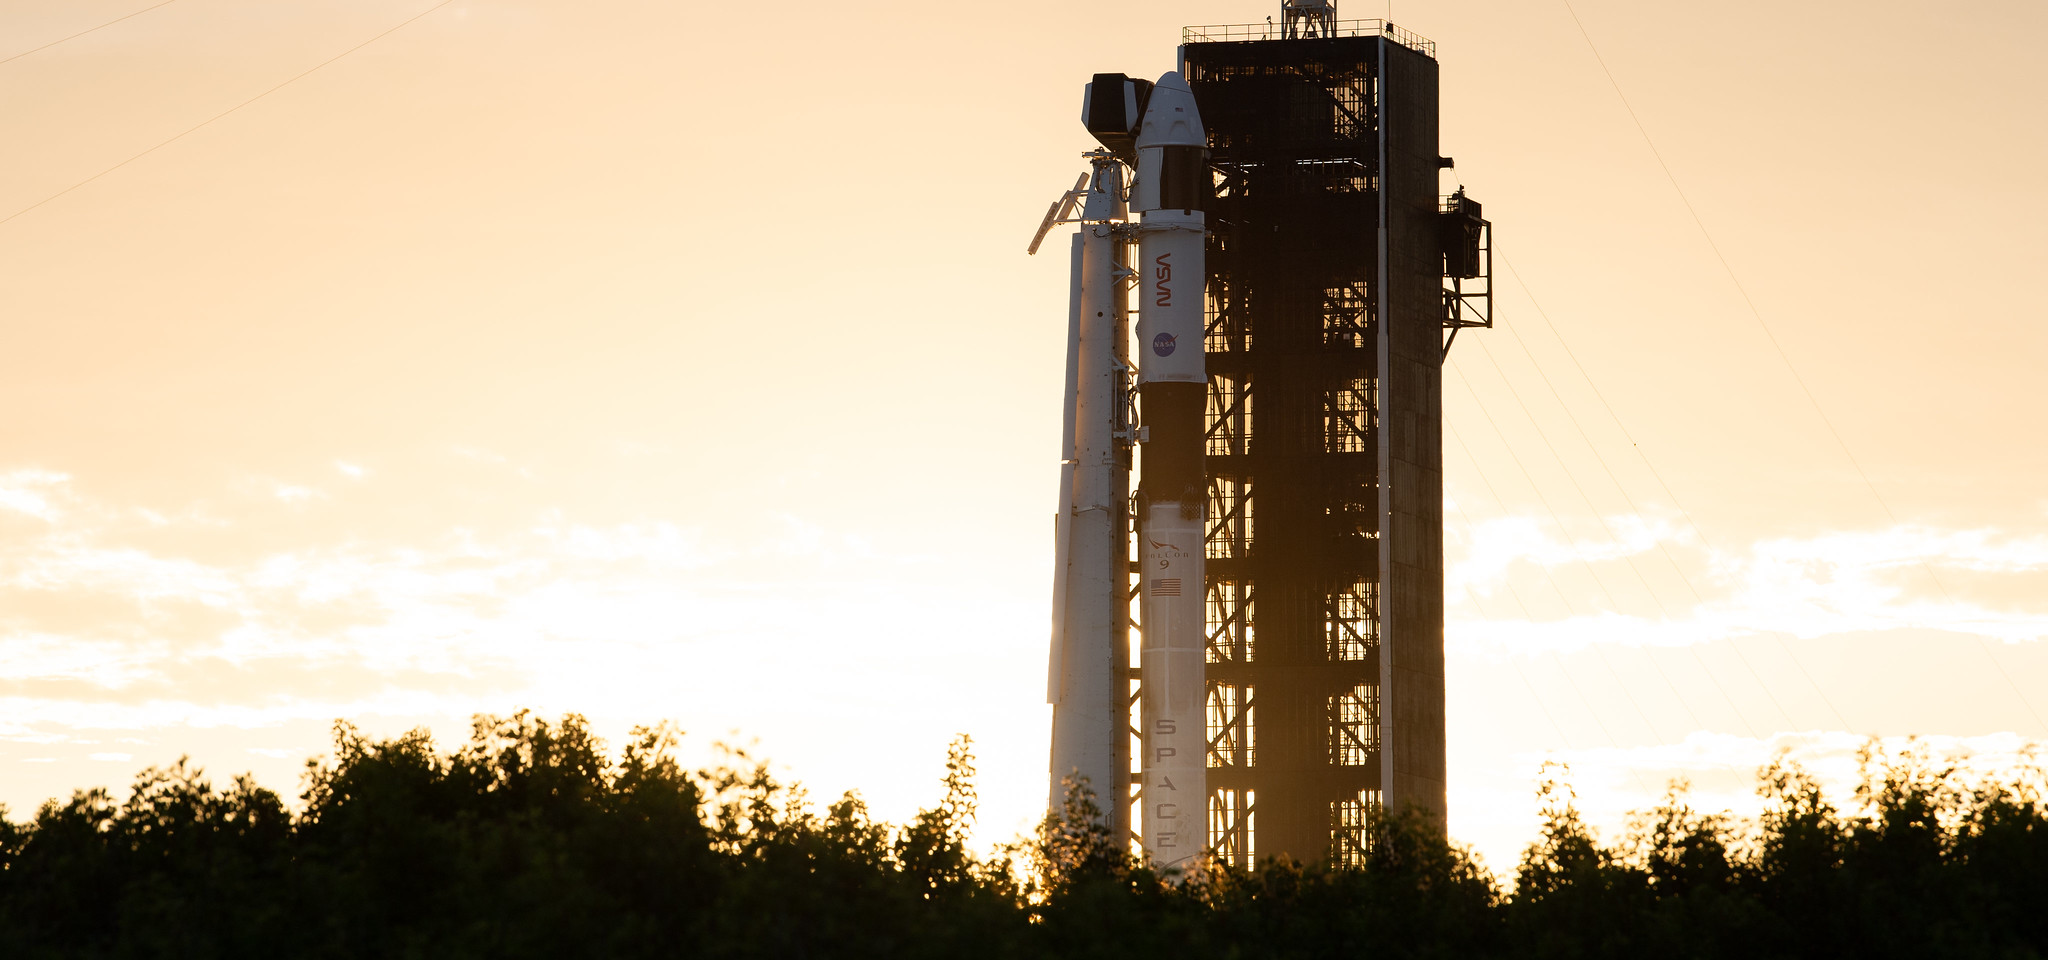 A SpaceX Falcon 9 rocket with the company's Crew Dragon spacecraft onboard is seen at sunset on the launch pad at Launch Complex 39A as preparations continue for the Crew-3 mission, Wednesday, Oct. 27, 2021, at NASA’s Kennedy Space Center in Florida.